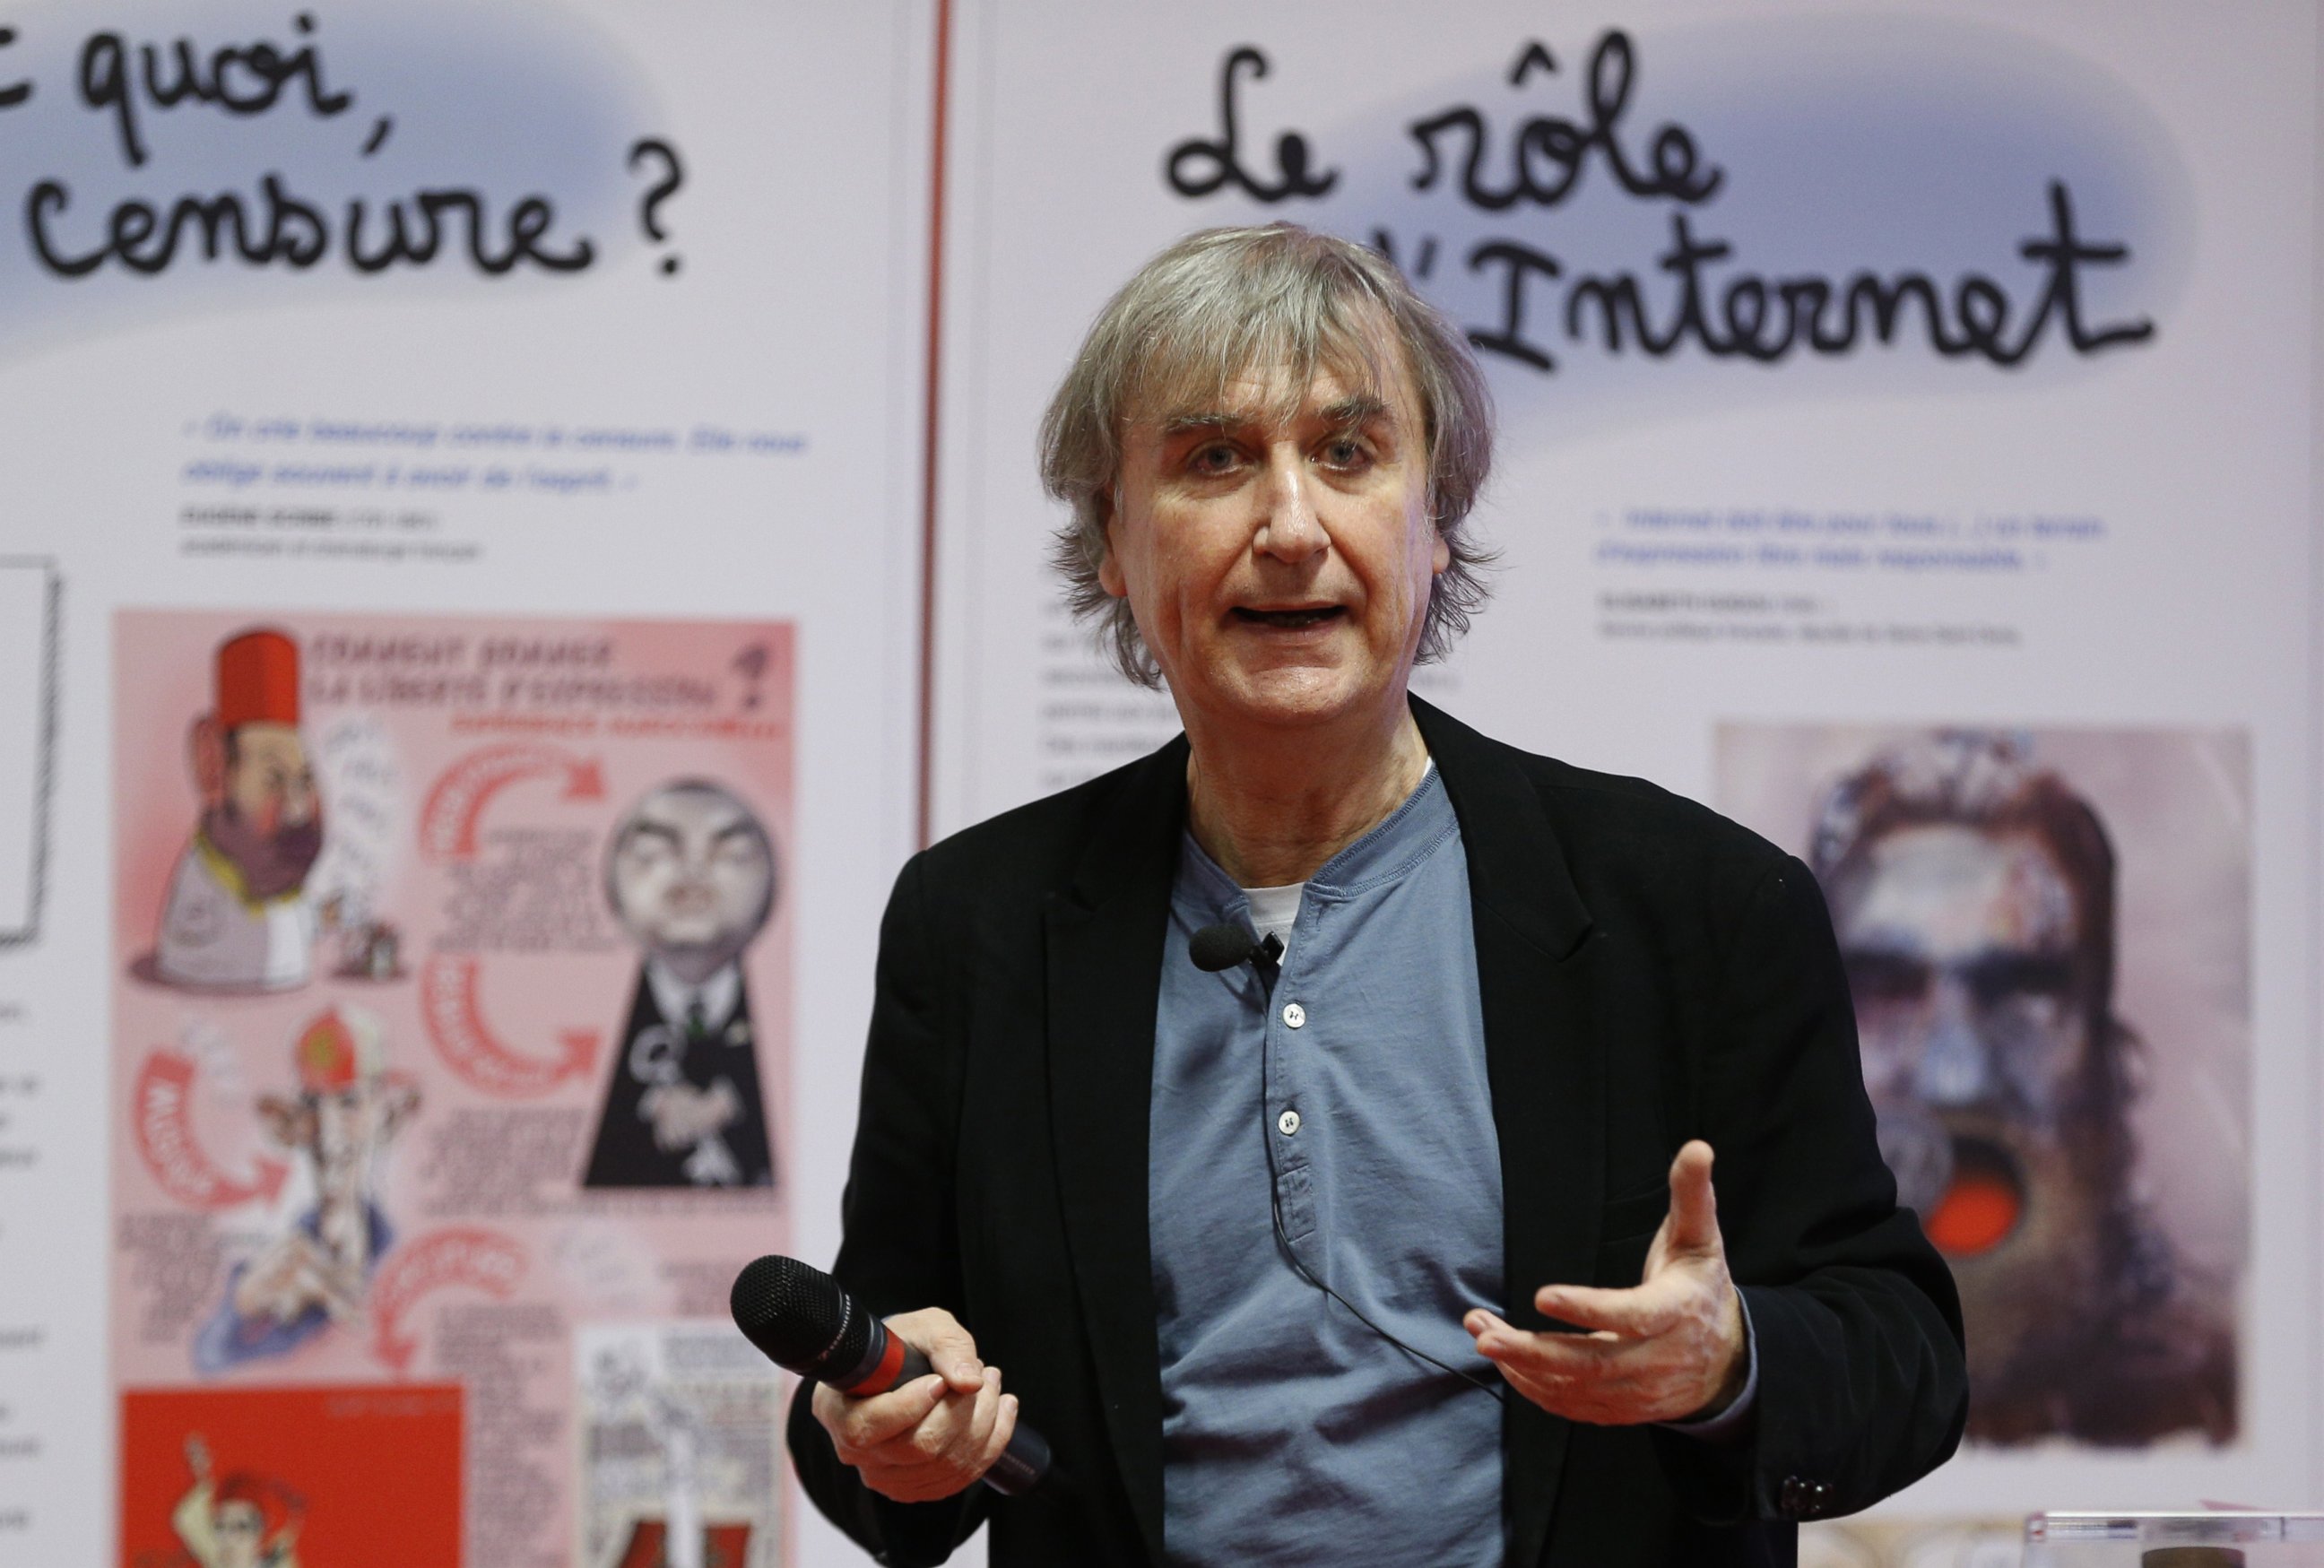 PHOTO: French cartoonist Plantu participates on Feb. 11, 2015 in a workshop with students in the Paris suburb of Malakoff.  